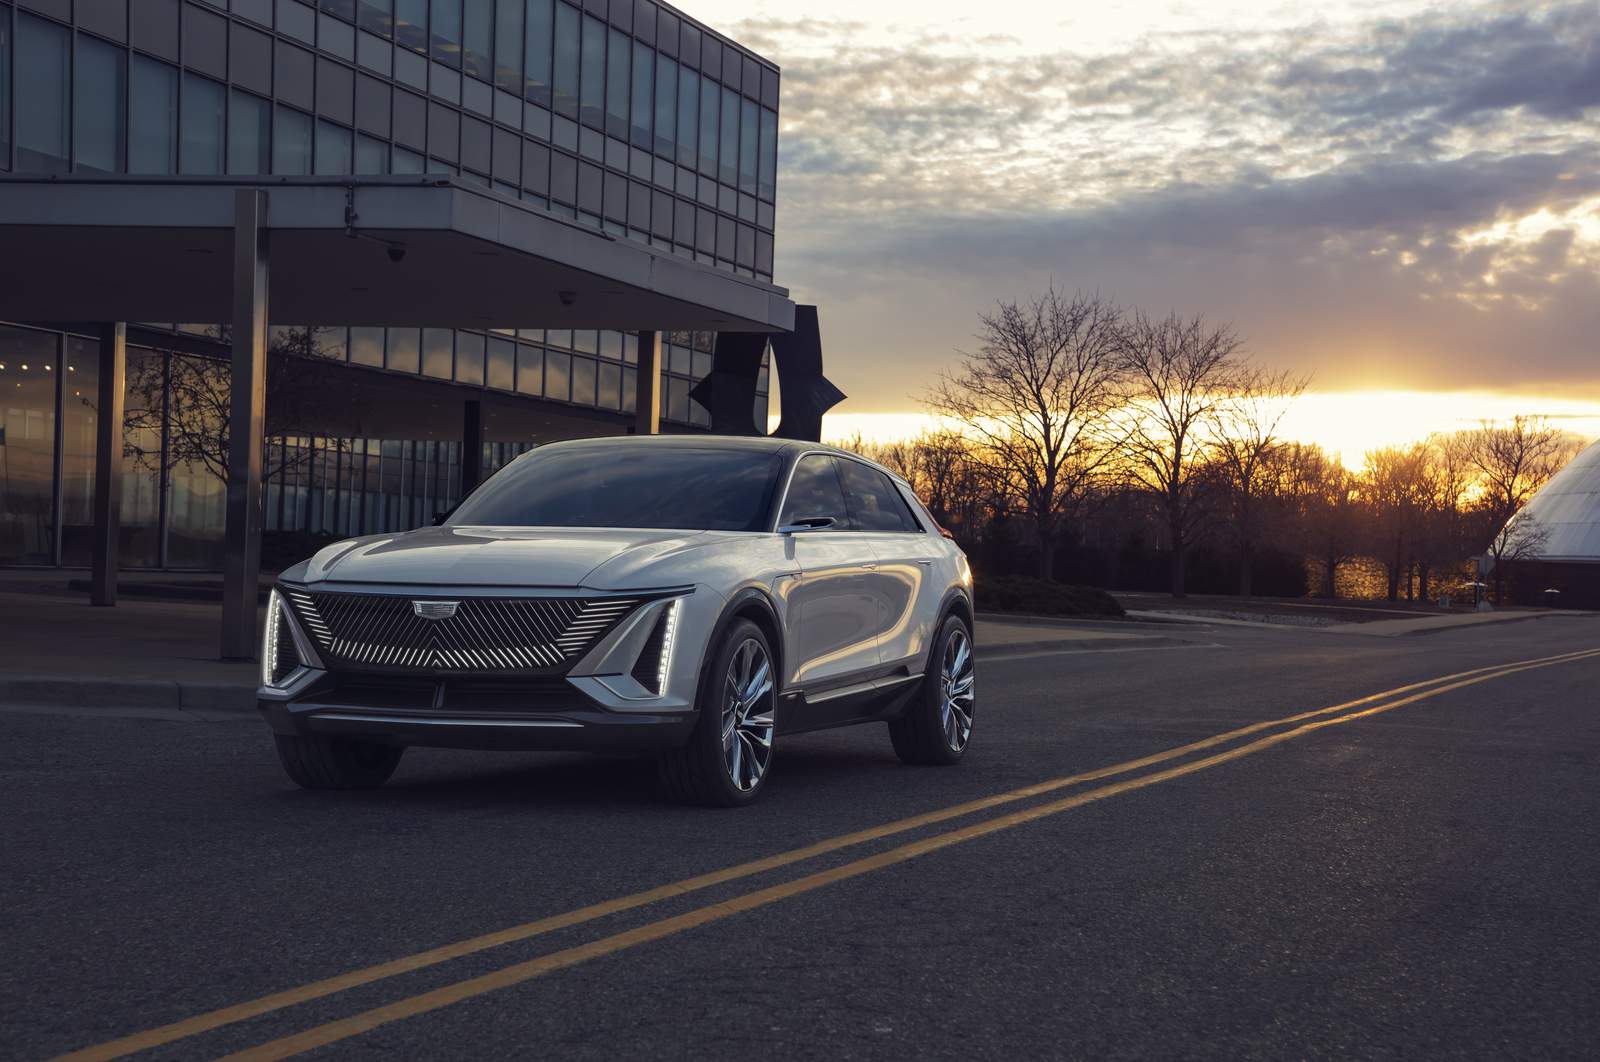 Cadillac debuts LYRIQ show car, a fully electric crossover vehicle